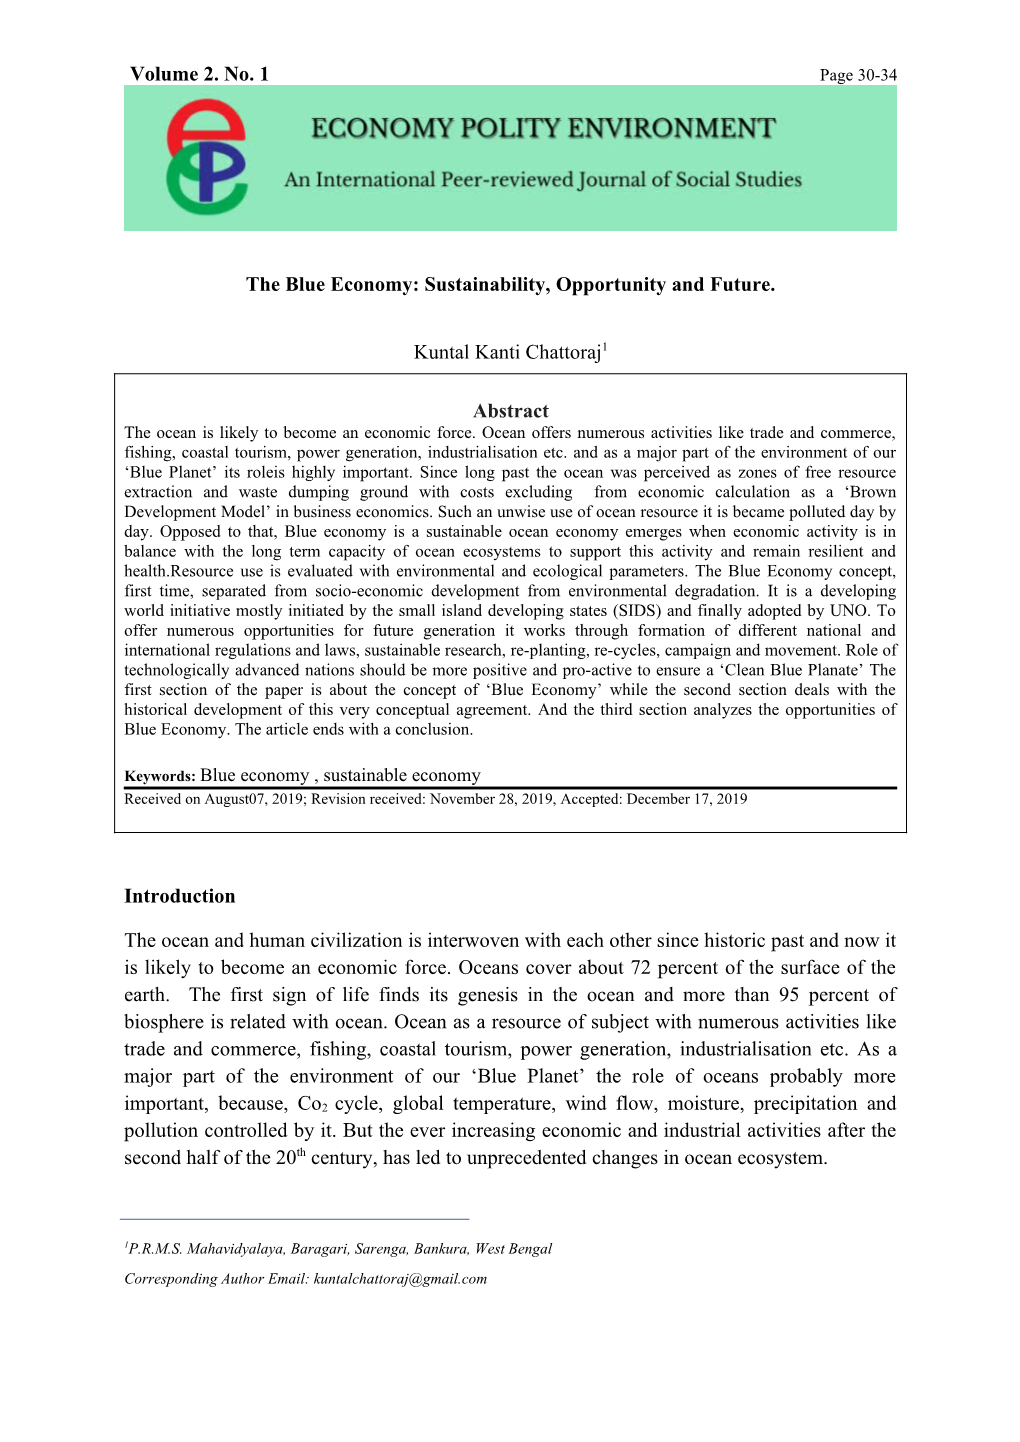 Volume 2. No. 1 the Blue Economy: Sustainability, Opportunity And